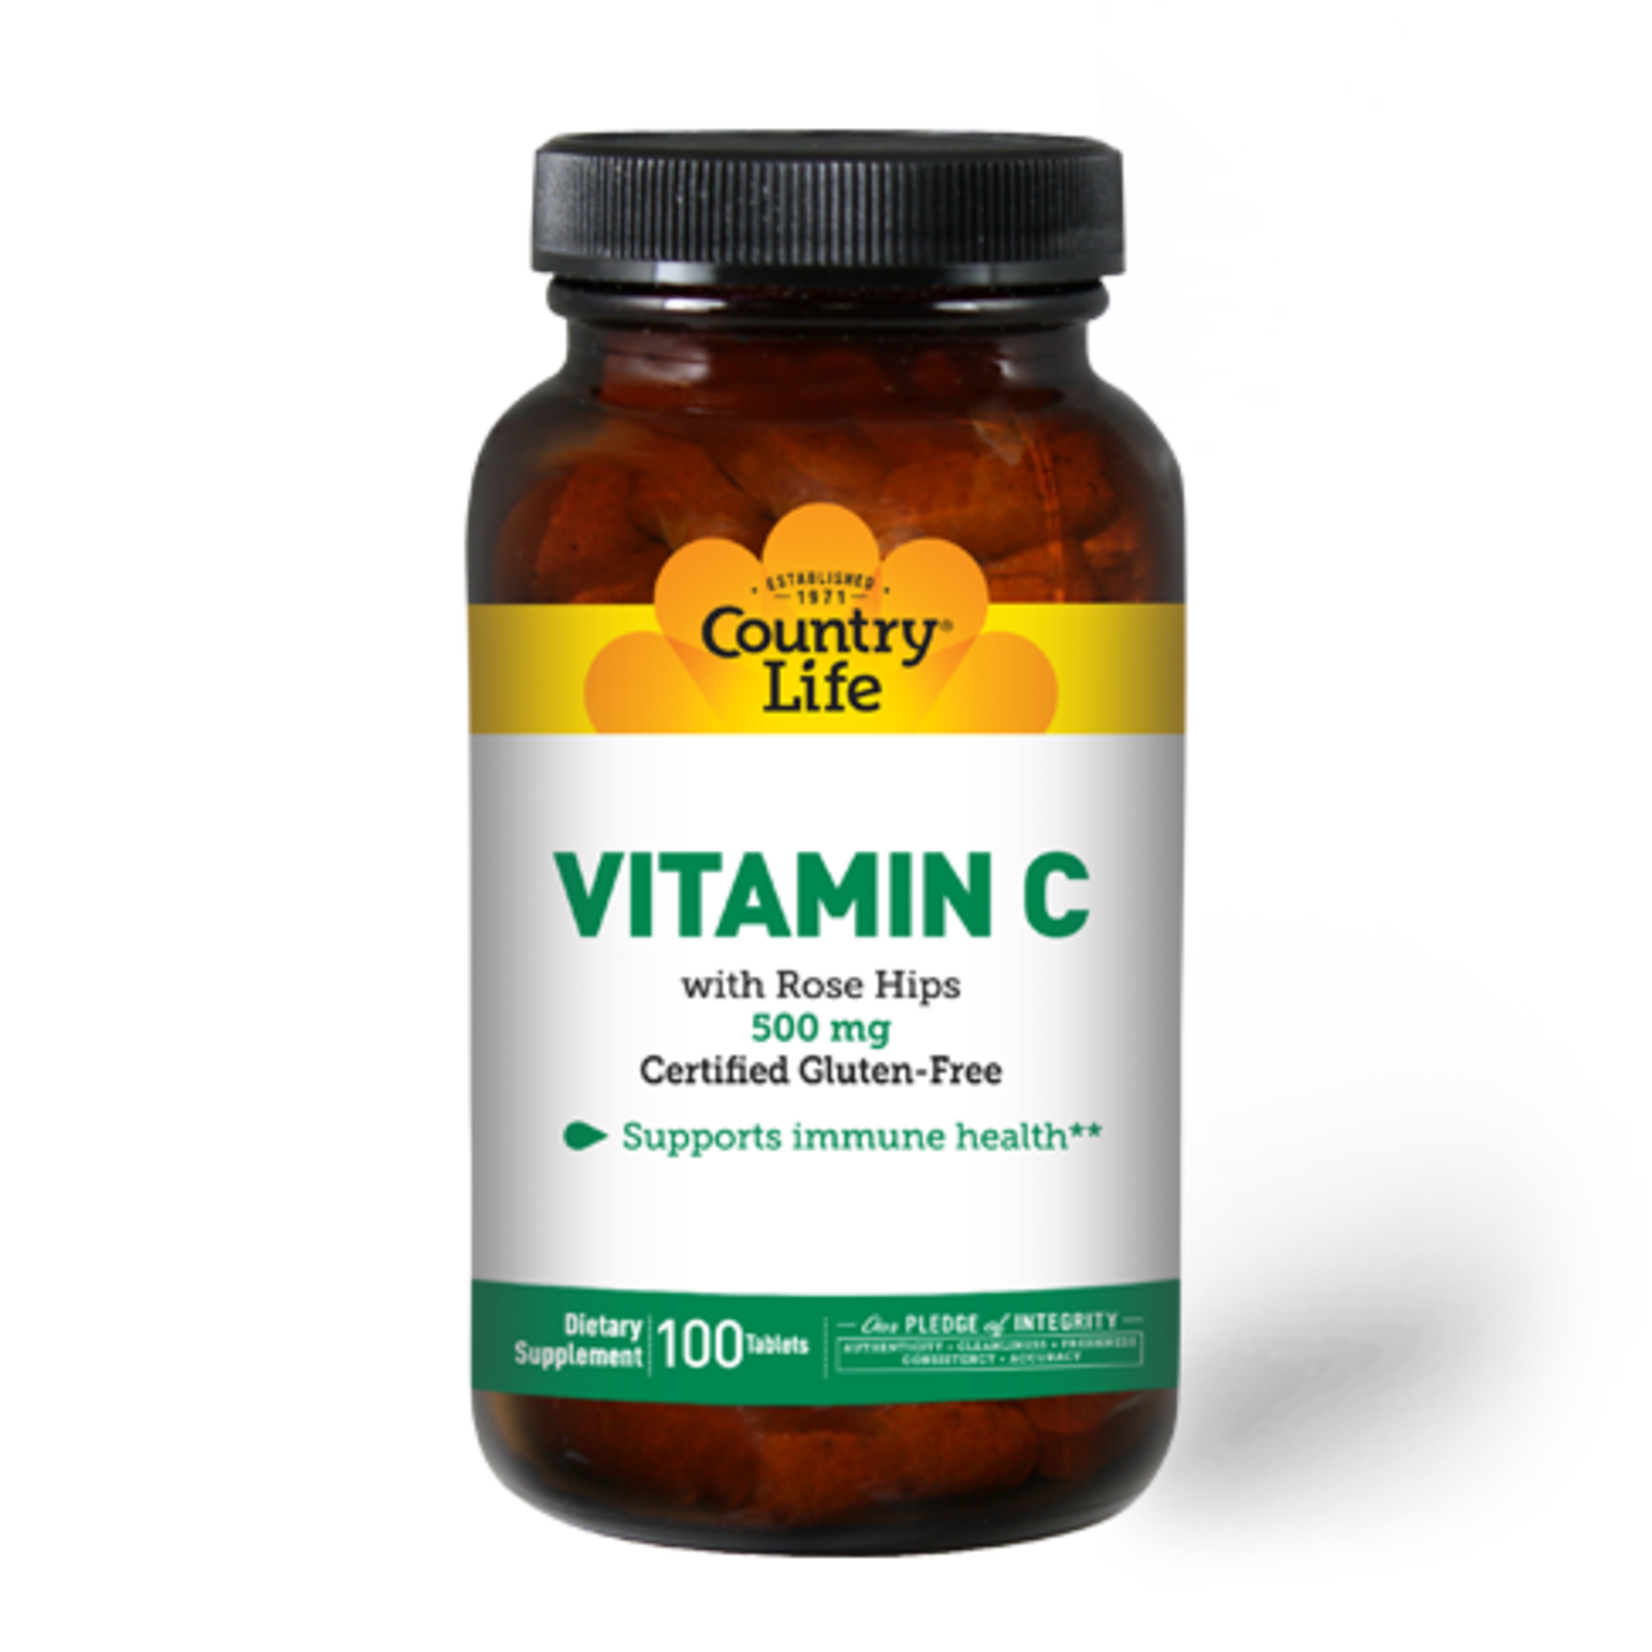 Country Life Country Life Vitamin C 500mg with Rose Hips 100 Tablets